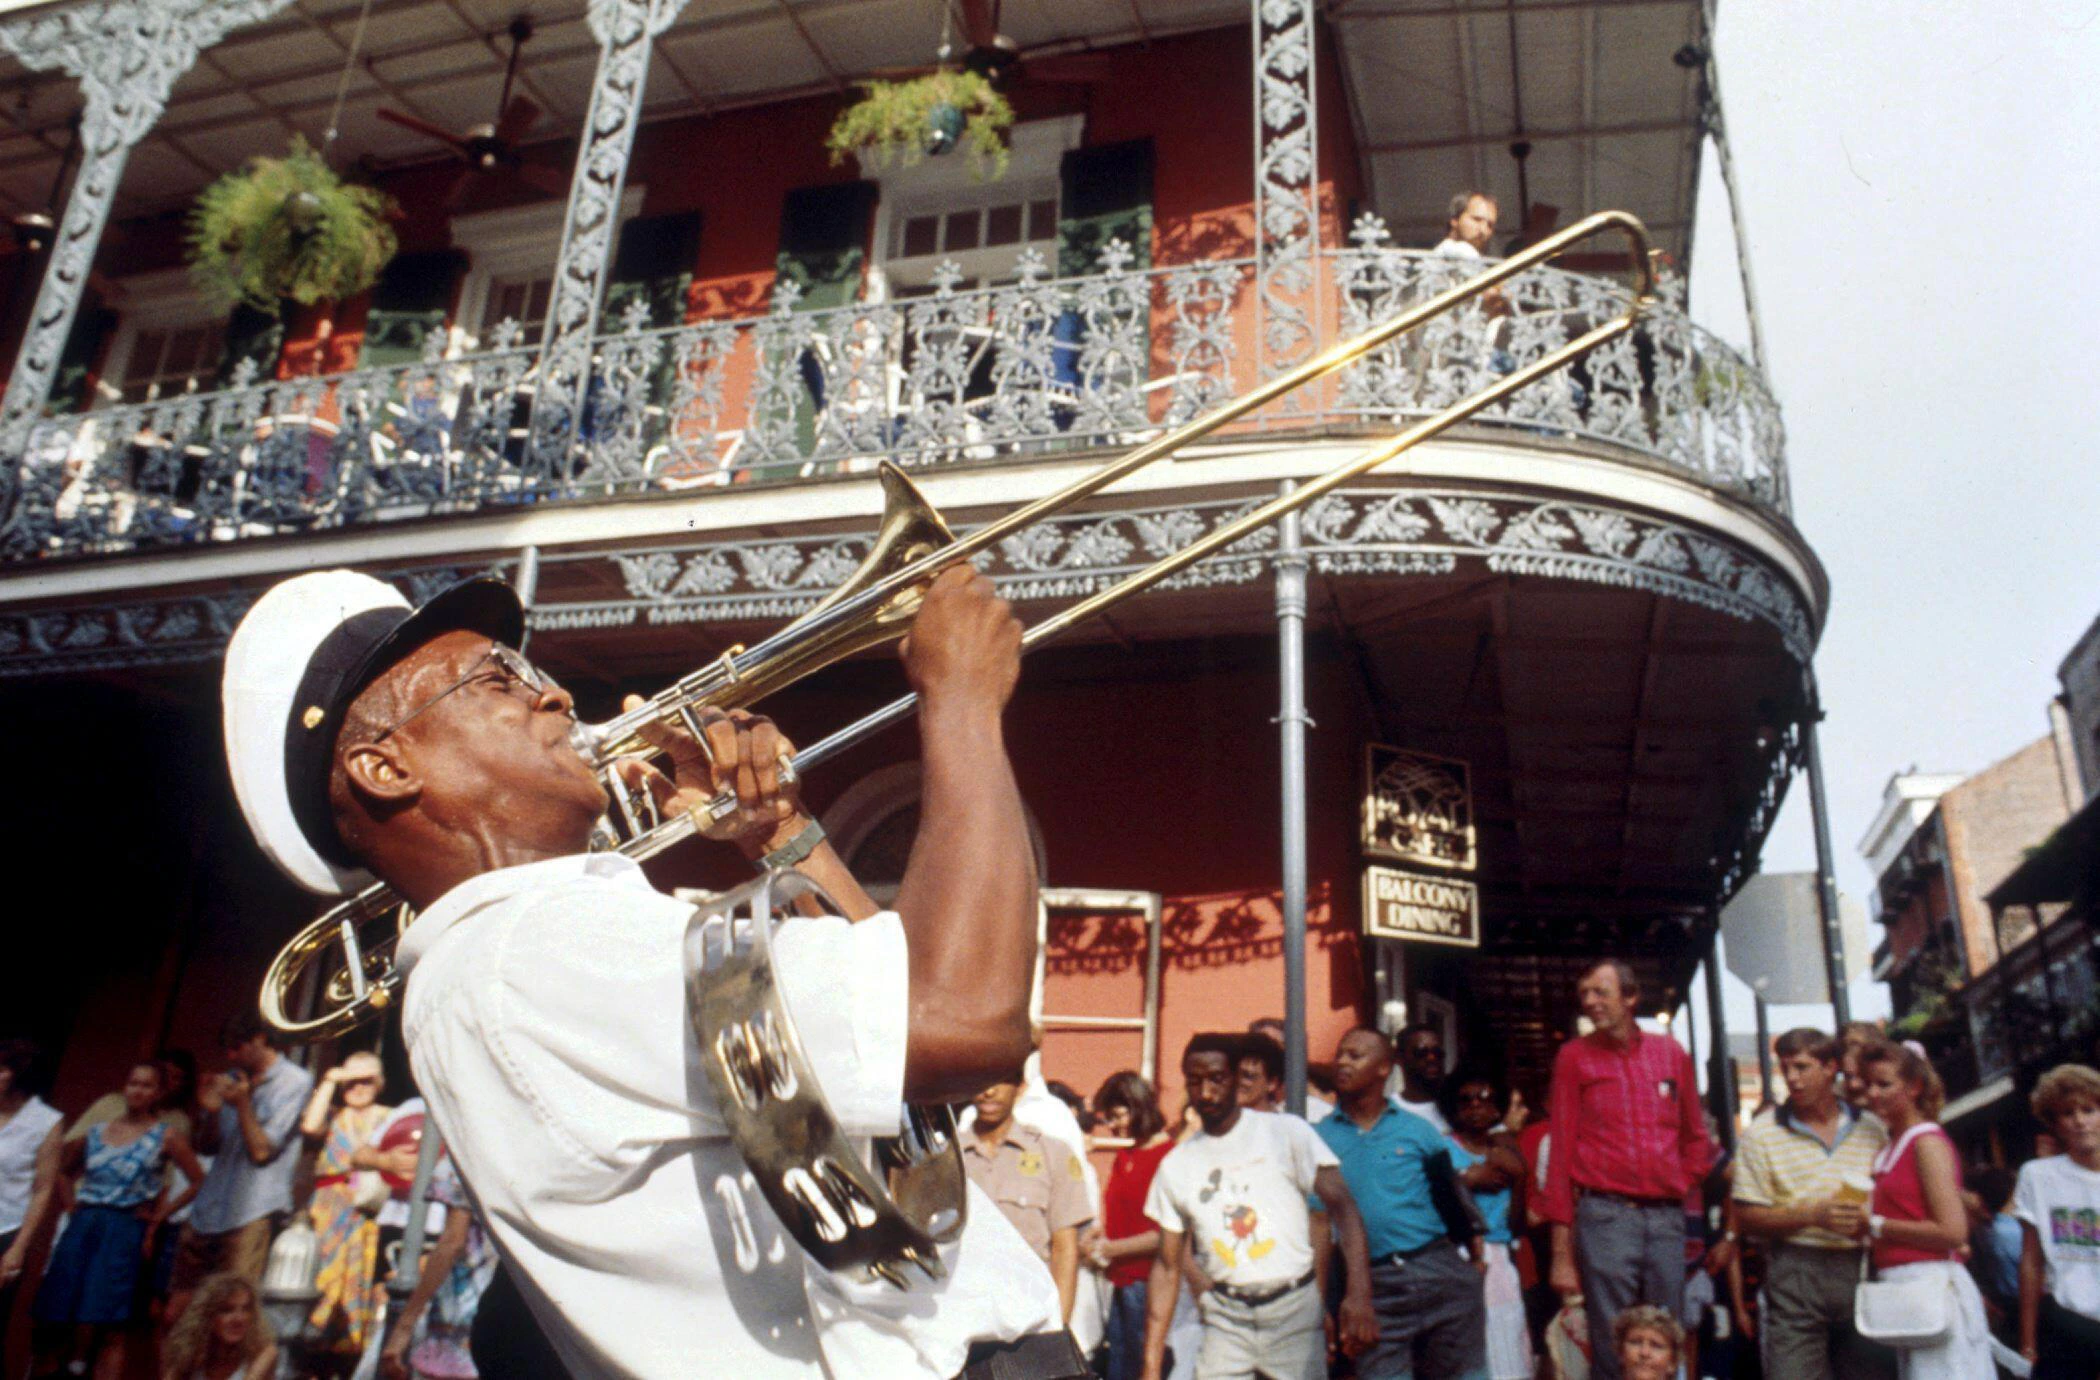 The Top 10 Greatest New Orleans Music Artists So Much Great Music